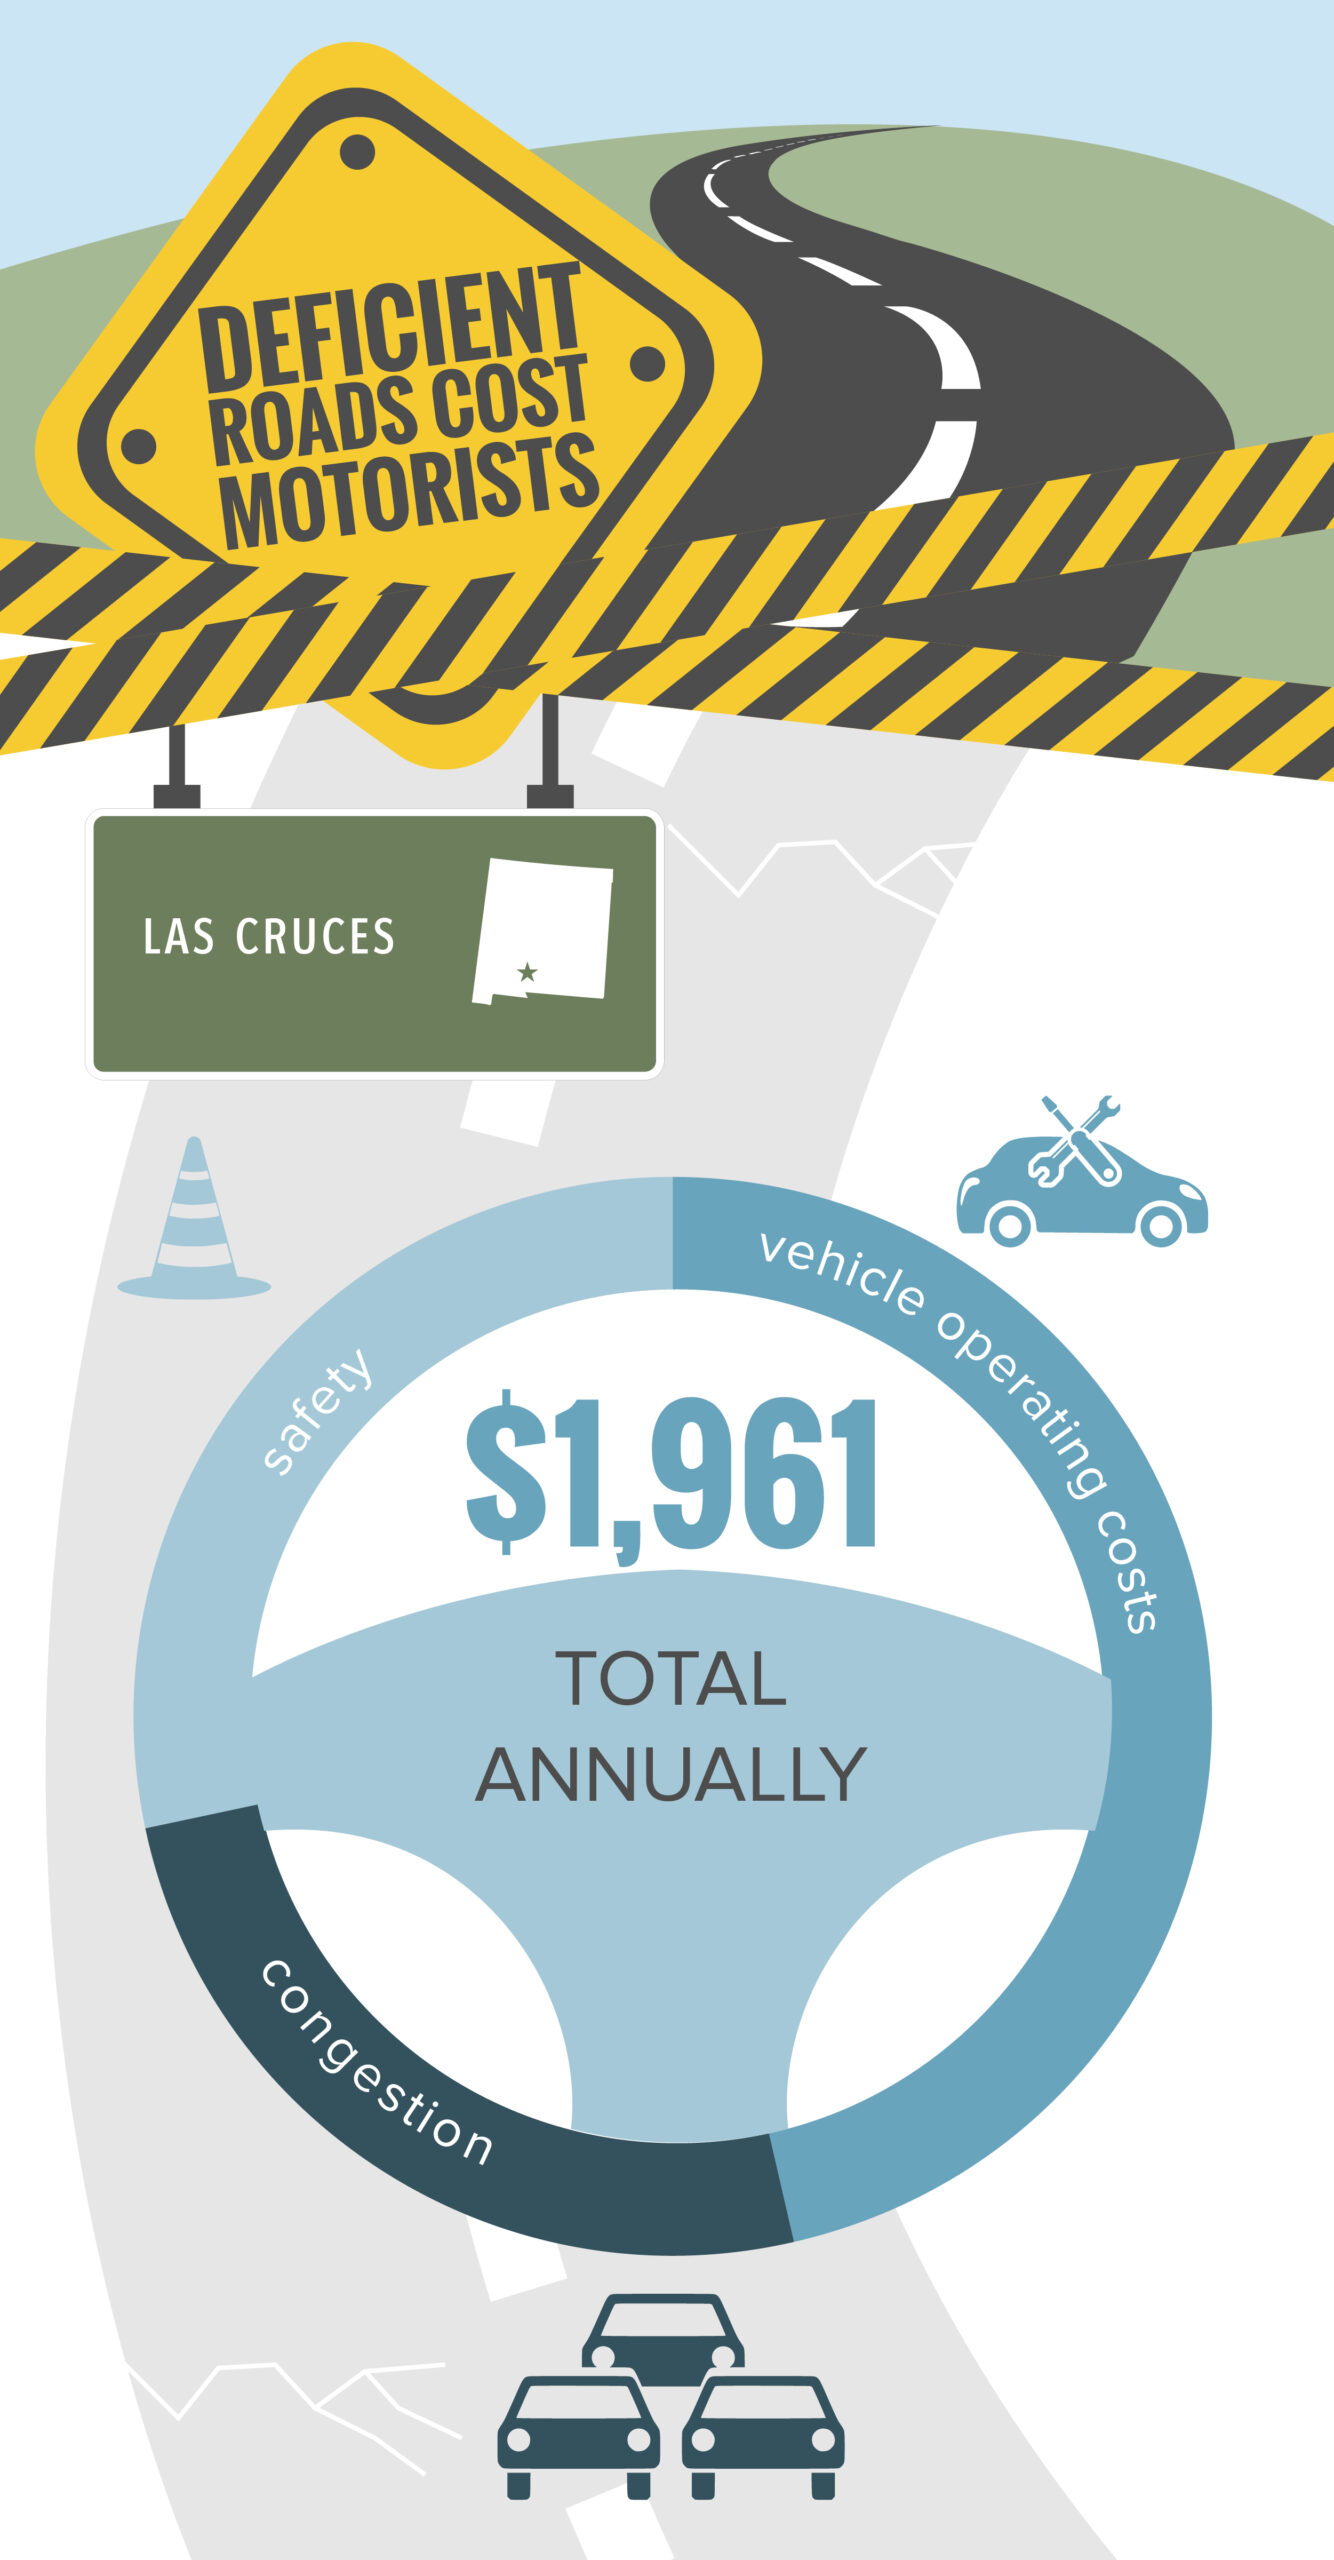 Las Cruces Deficient Roads Cost to Motorists Infographic – February 2023